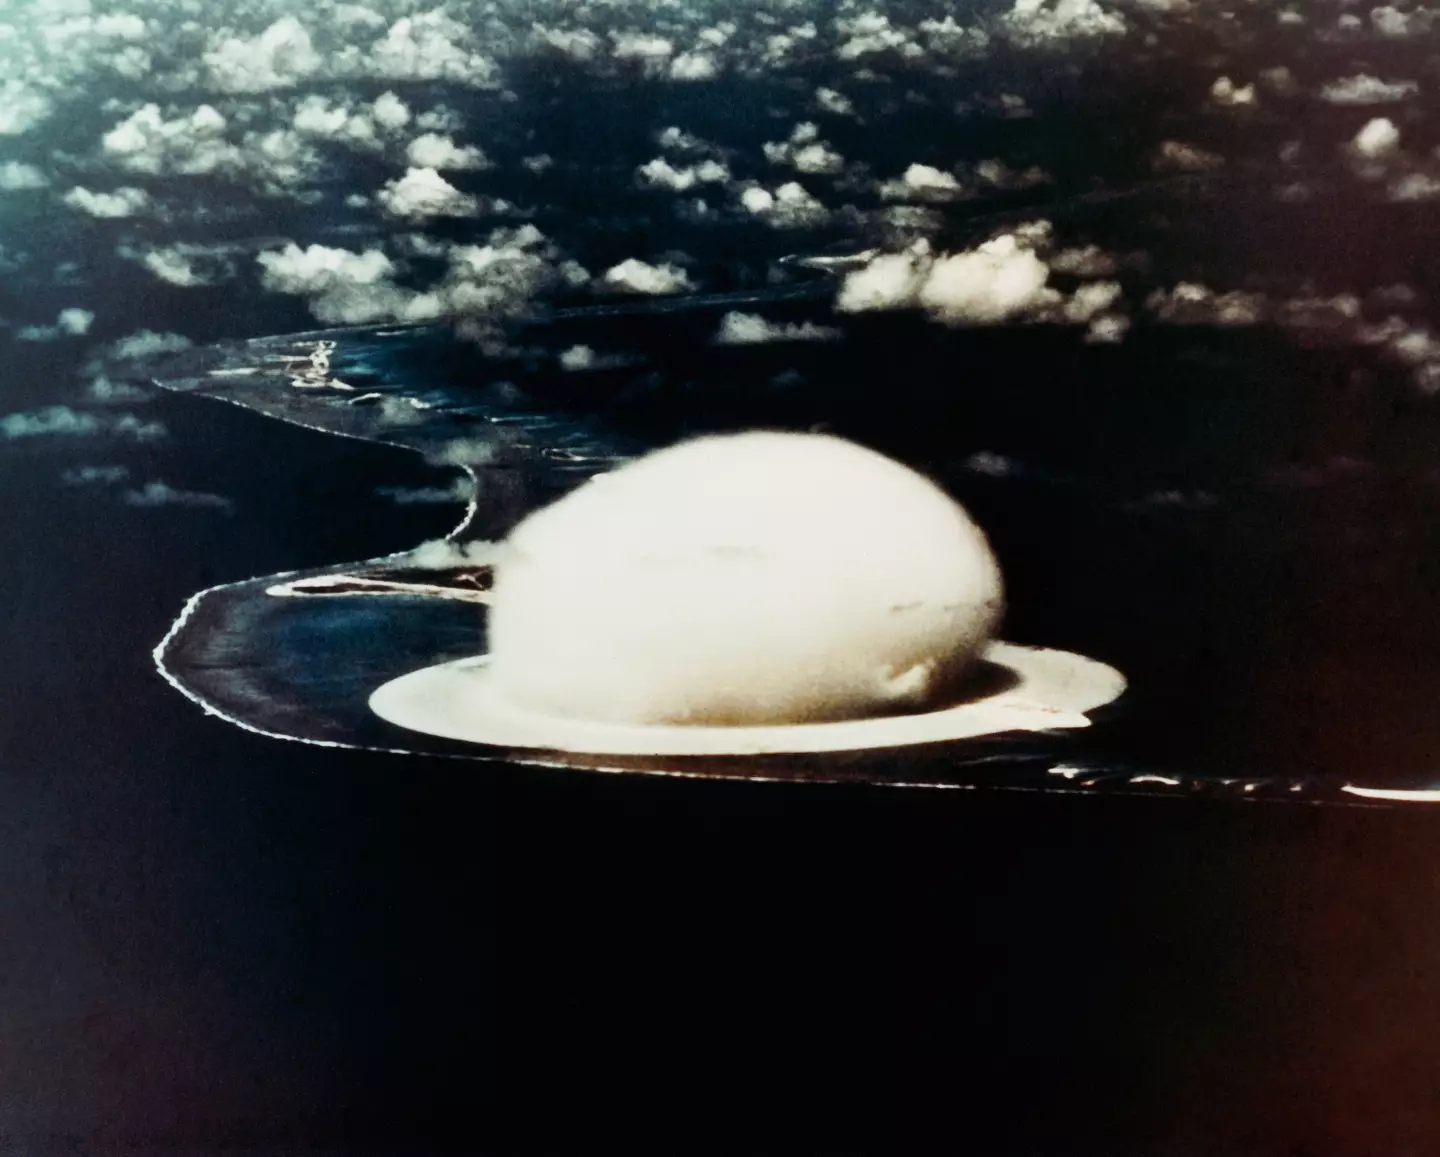 Runit Island is part of Enewetak Atoll, where the US tested nuclear bombs for years.